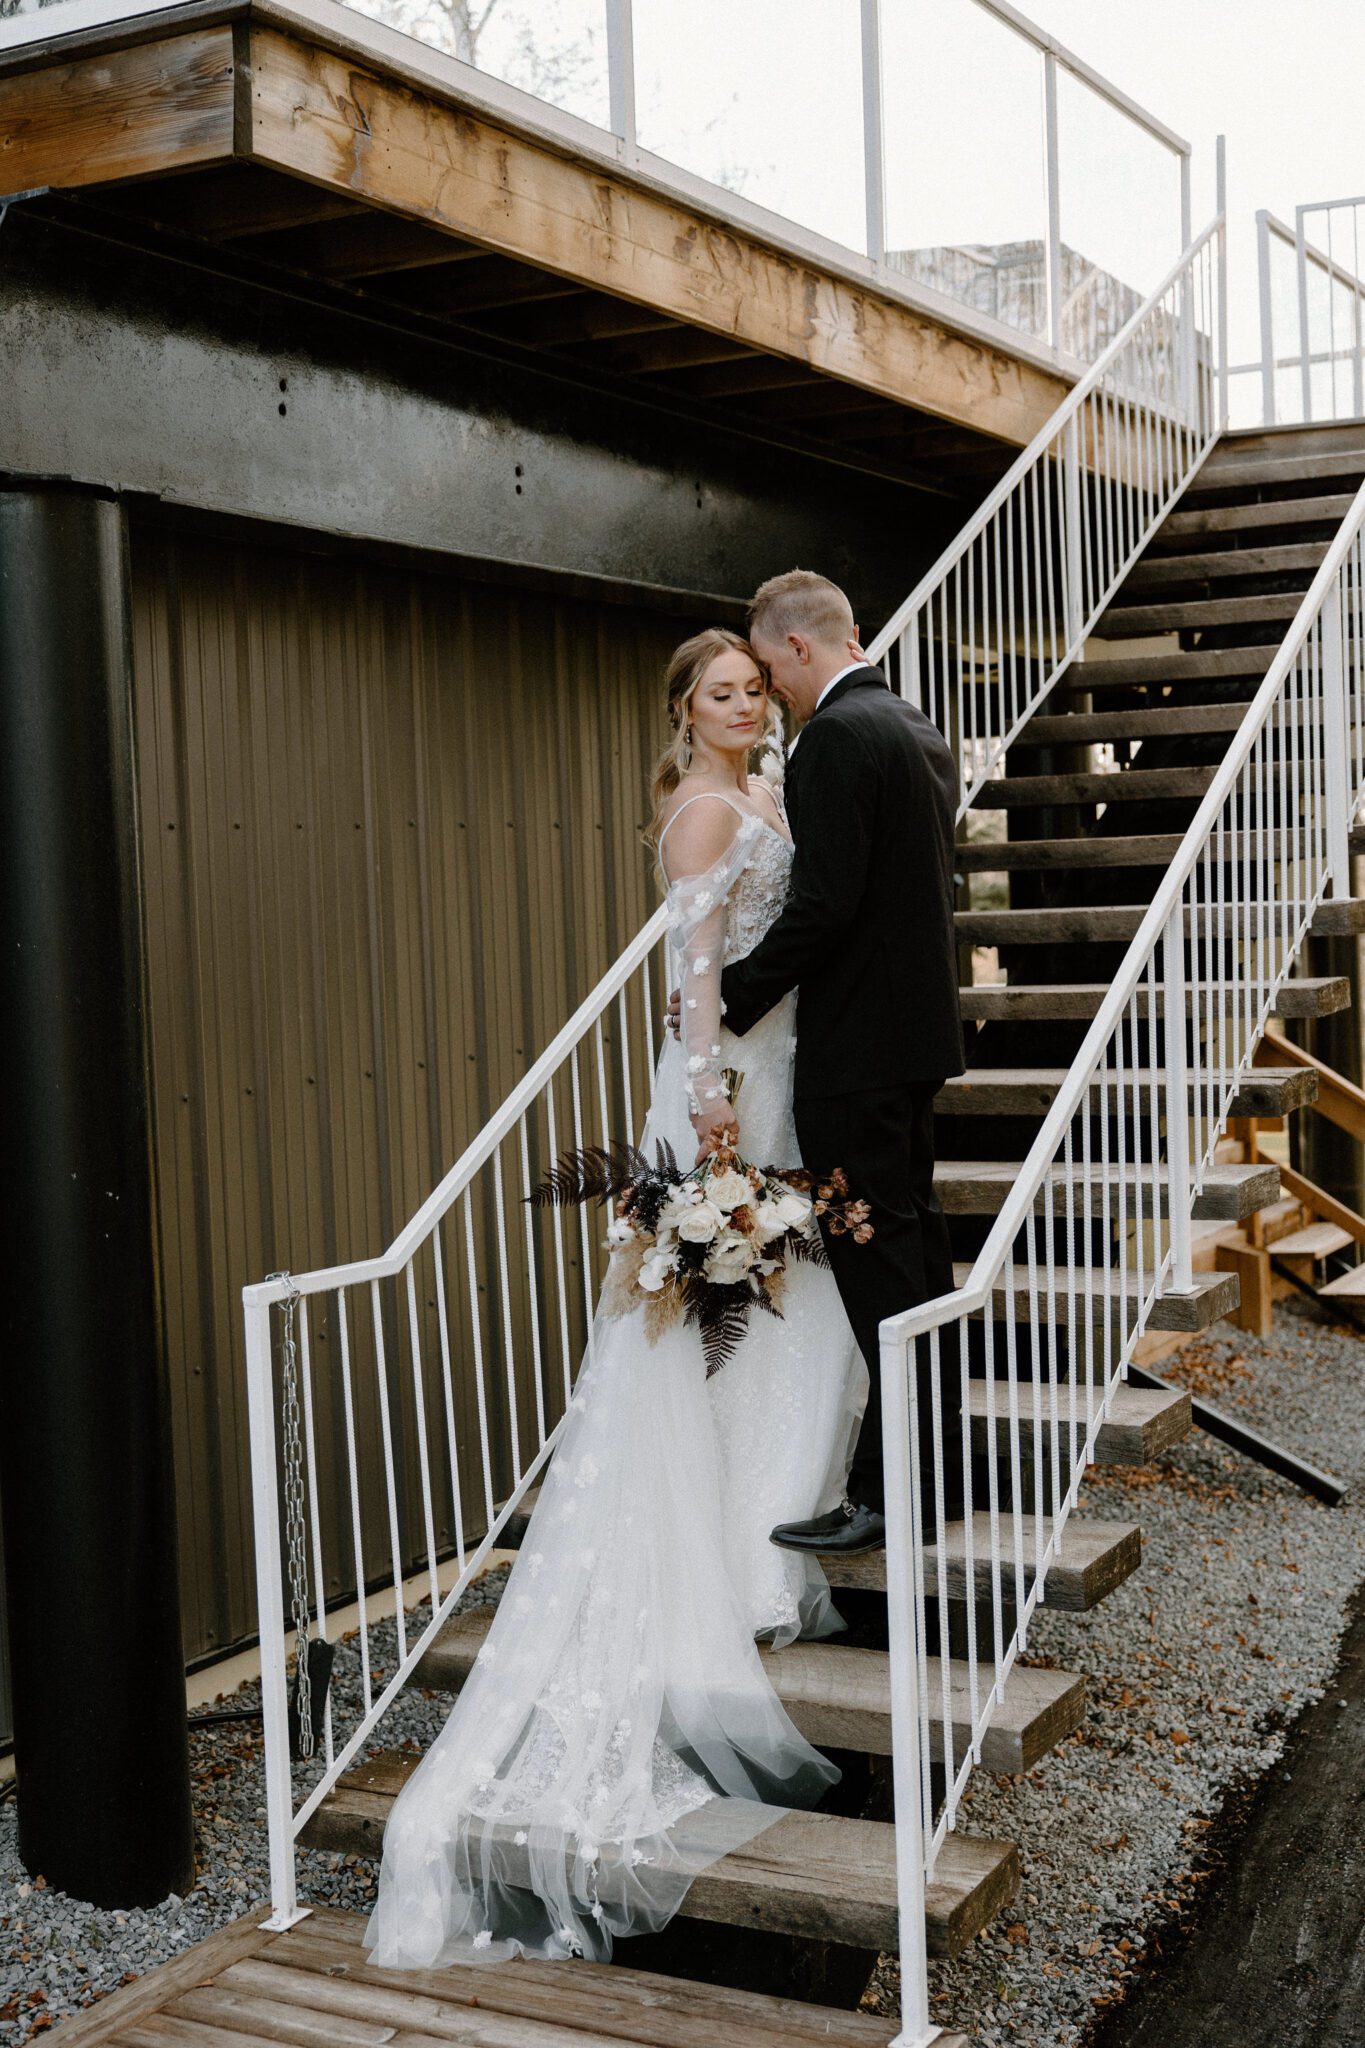 Elegant portrait of bride and groom at 52 North Venue on a staircase, with bride's floral-detailed dress draping down, warm and moody wedding inspiration.